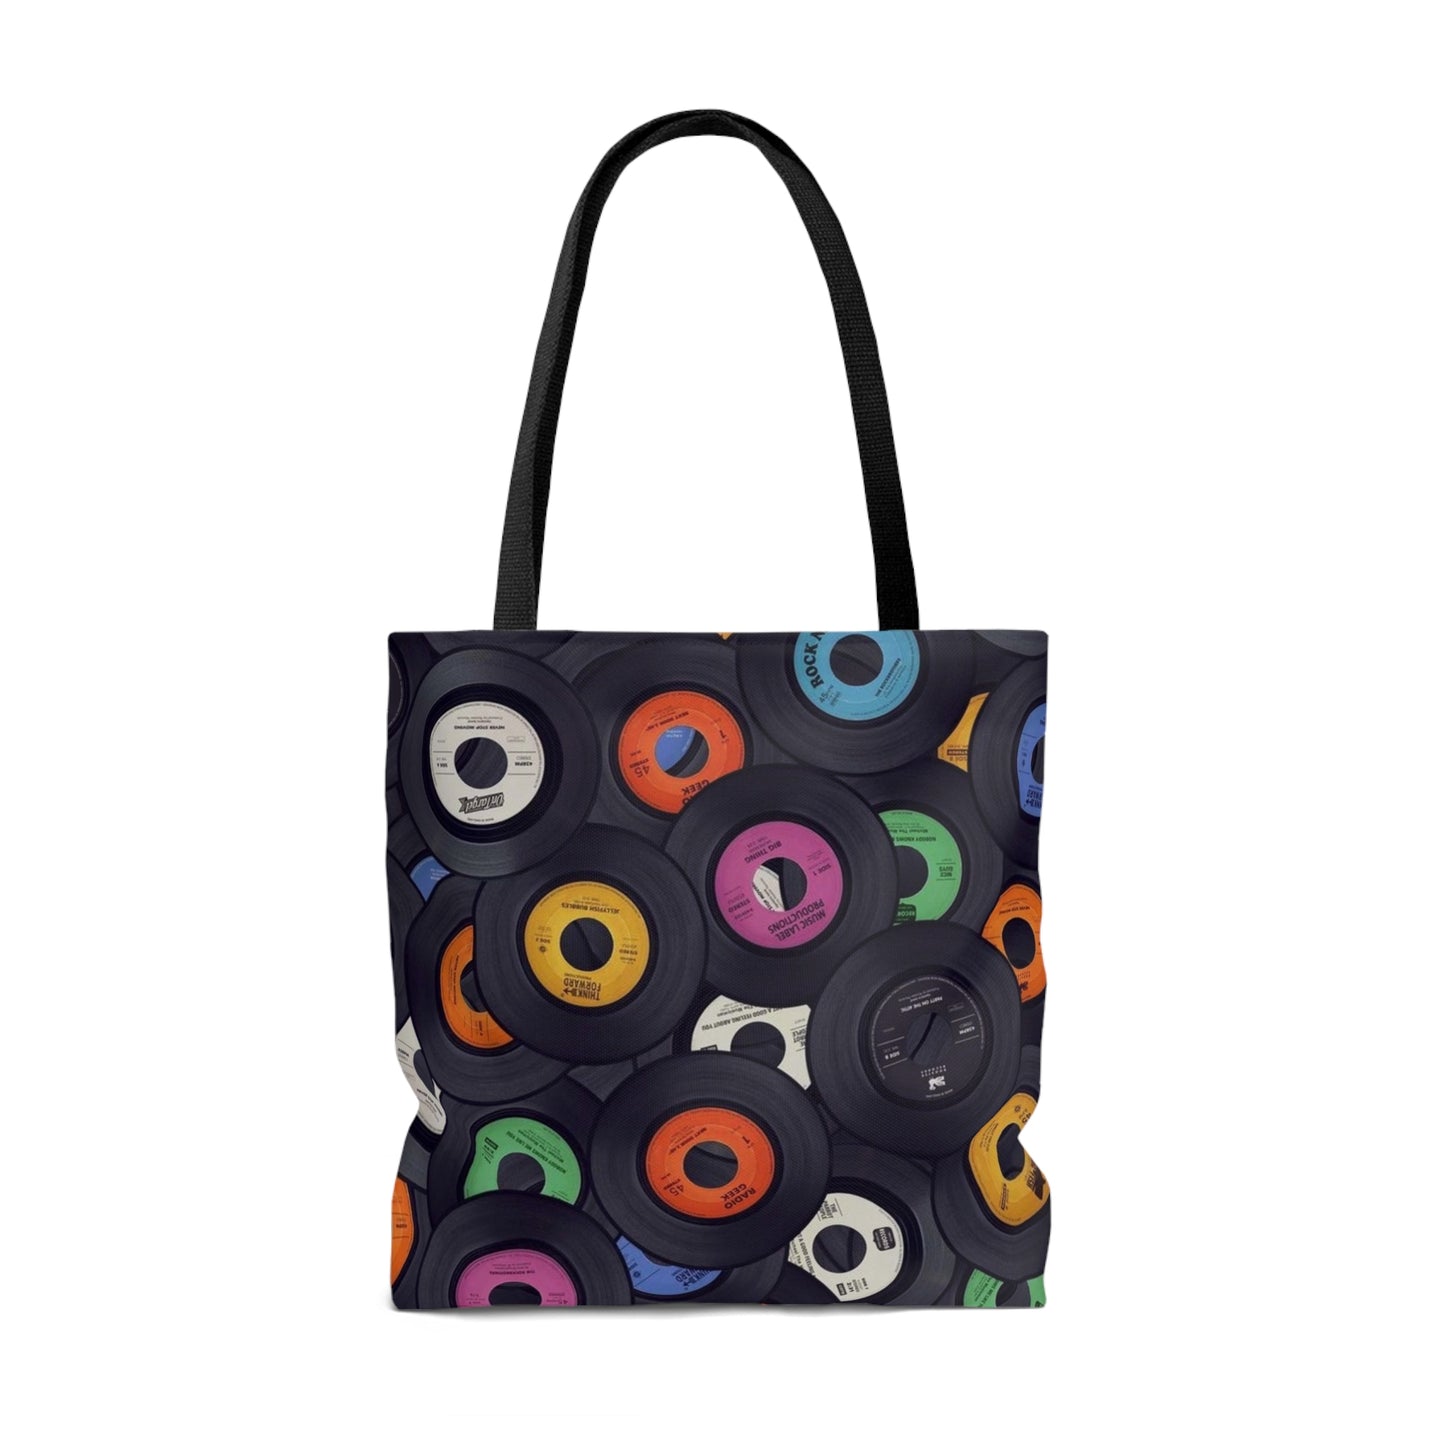 DOPiFiED tote bag